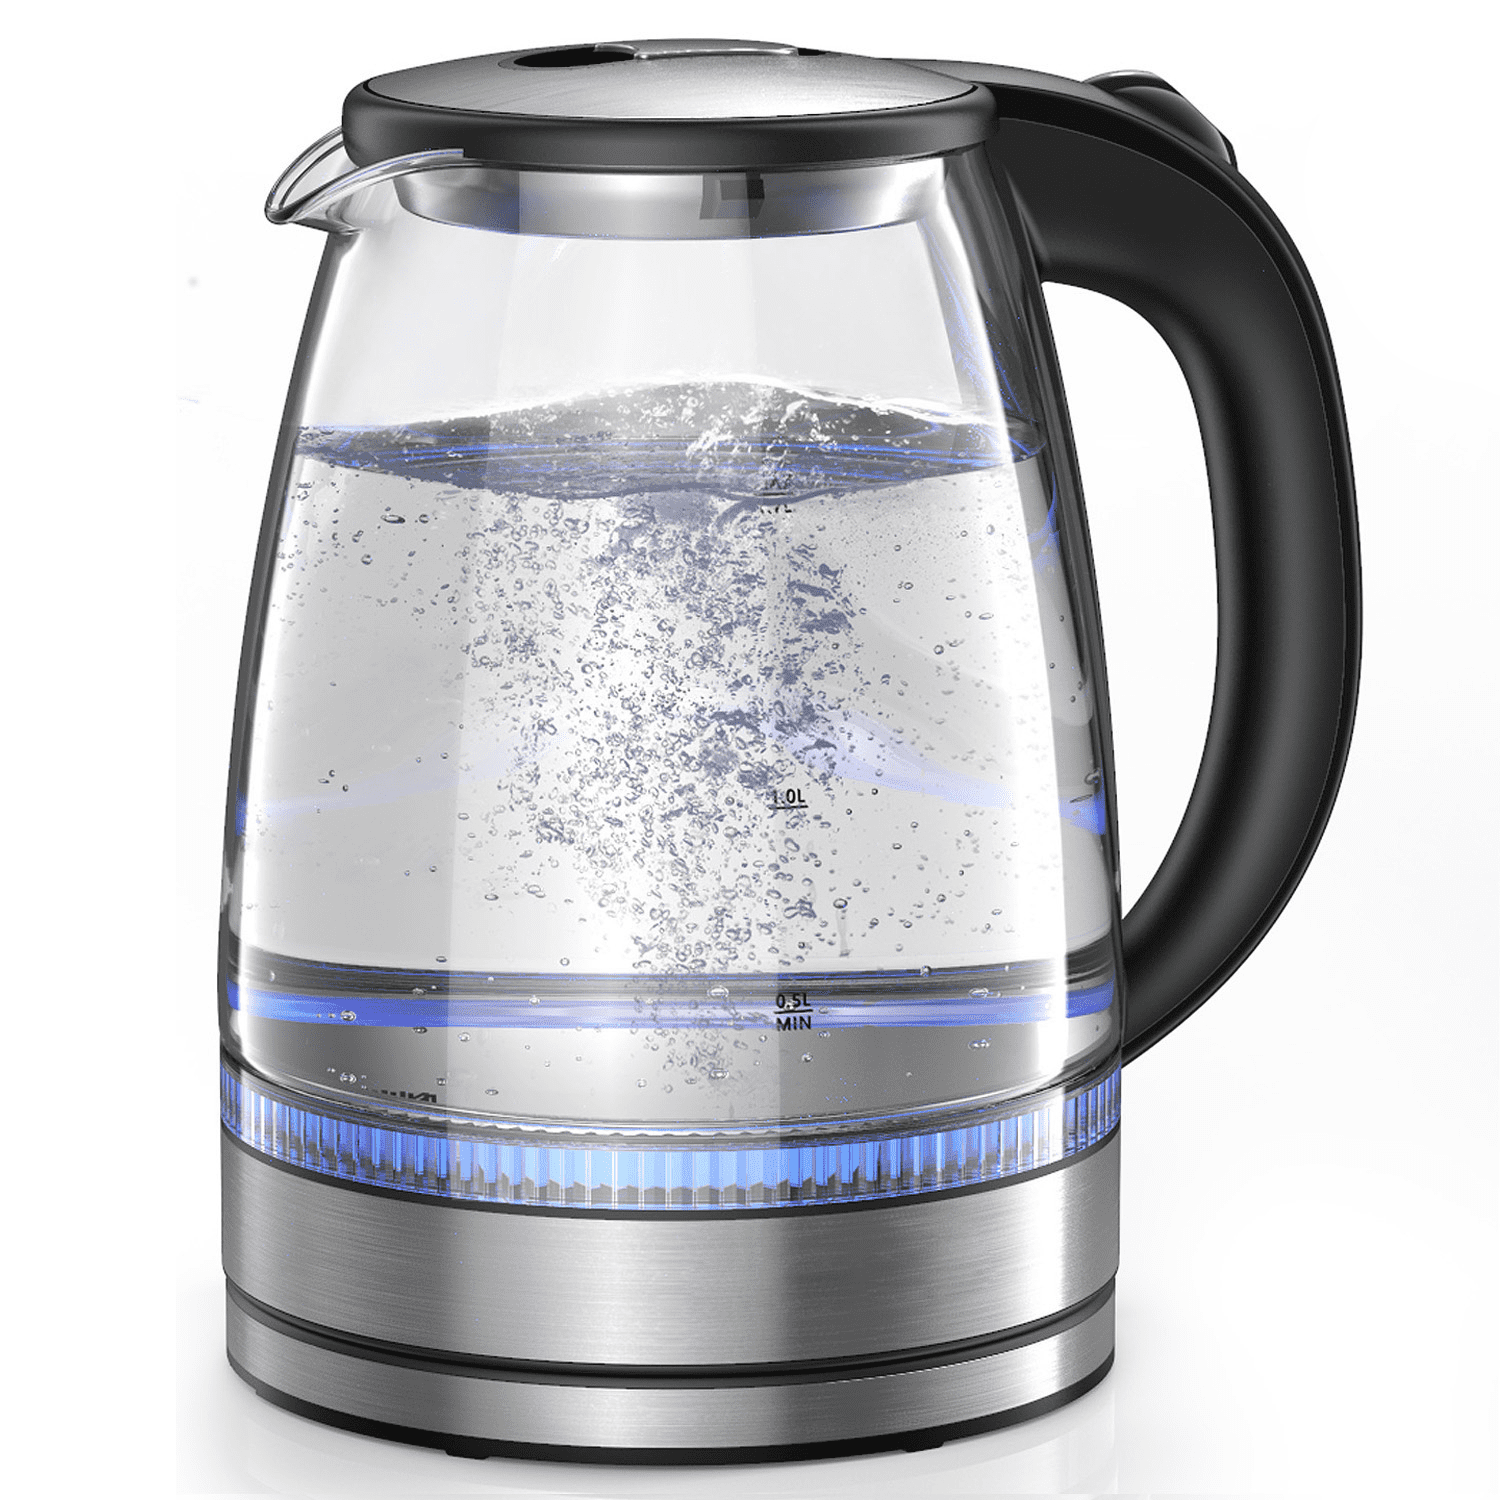 Transparent Quick-Boil Glass Kettle with 7 Liter Capacity